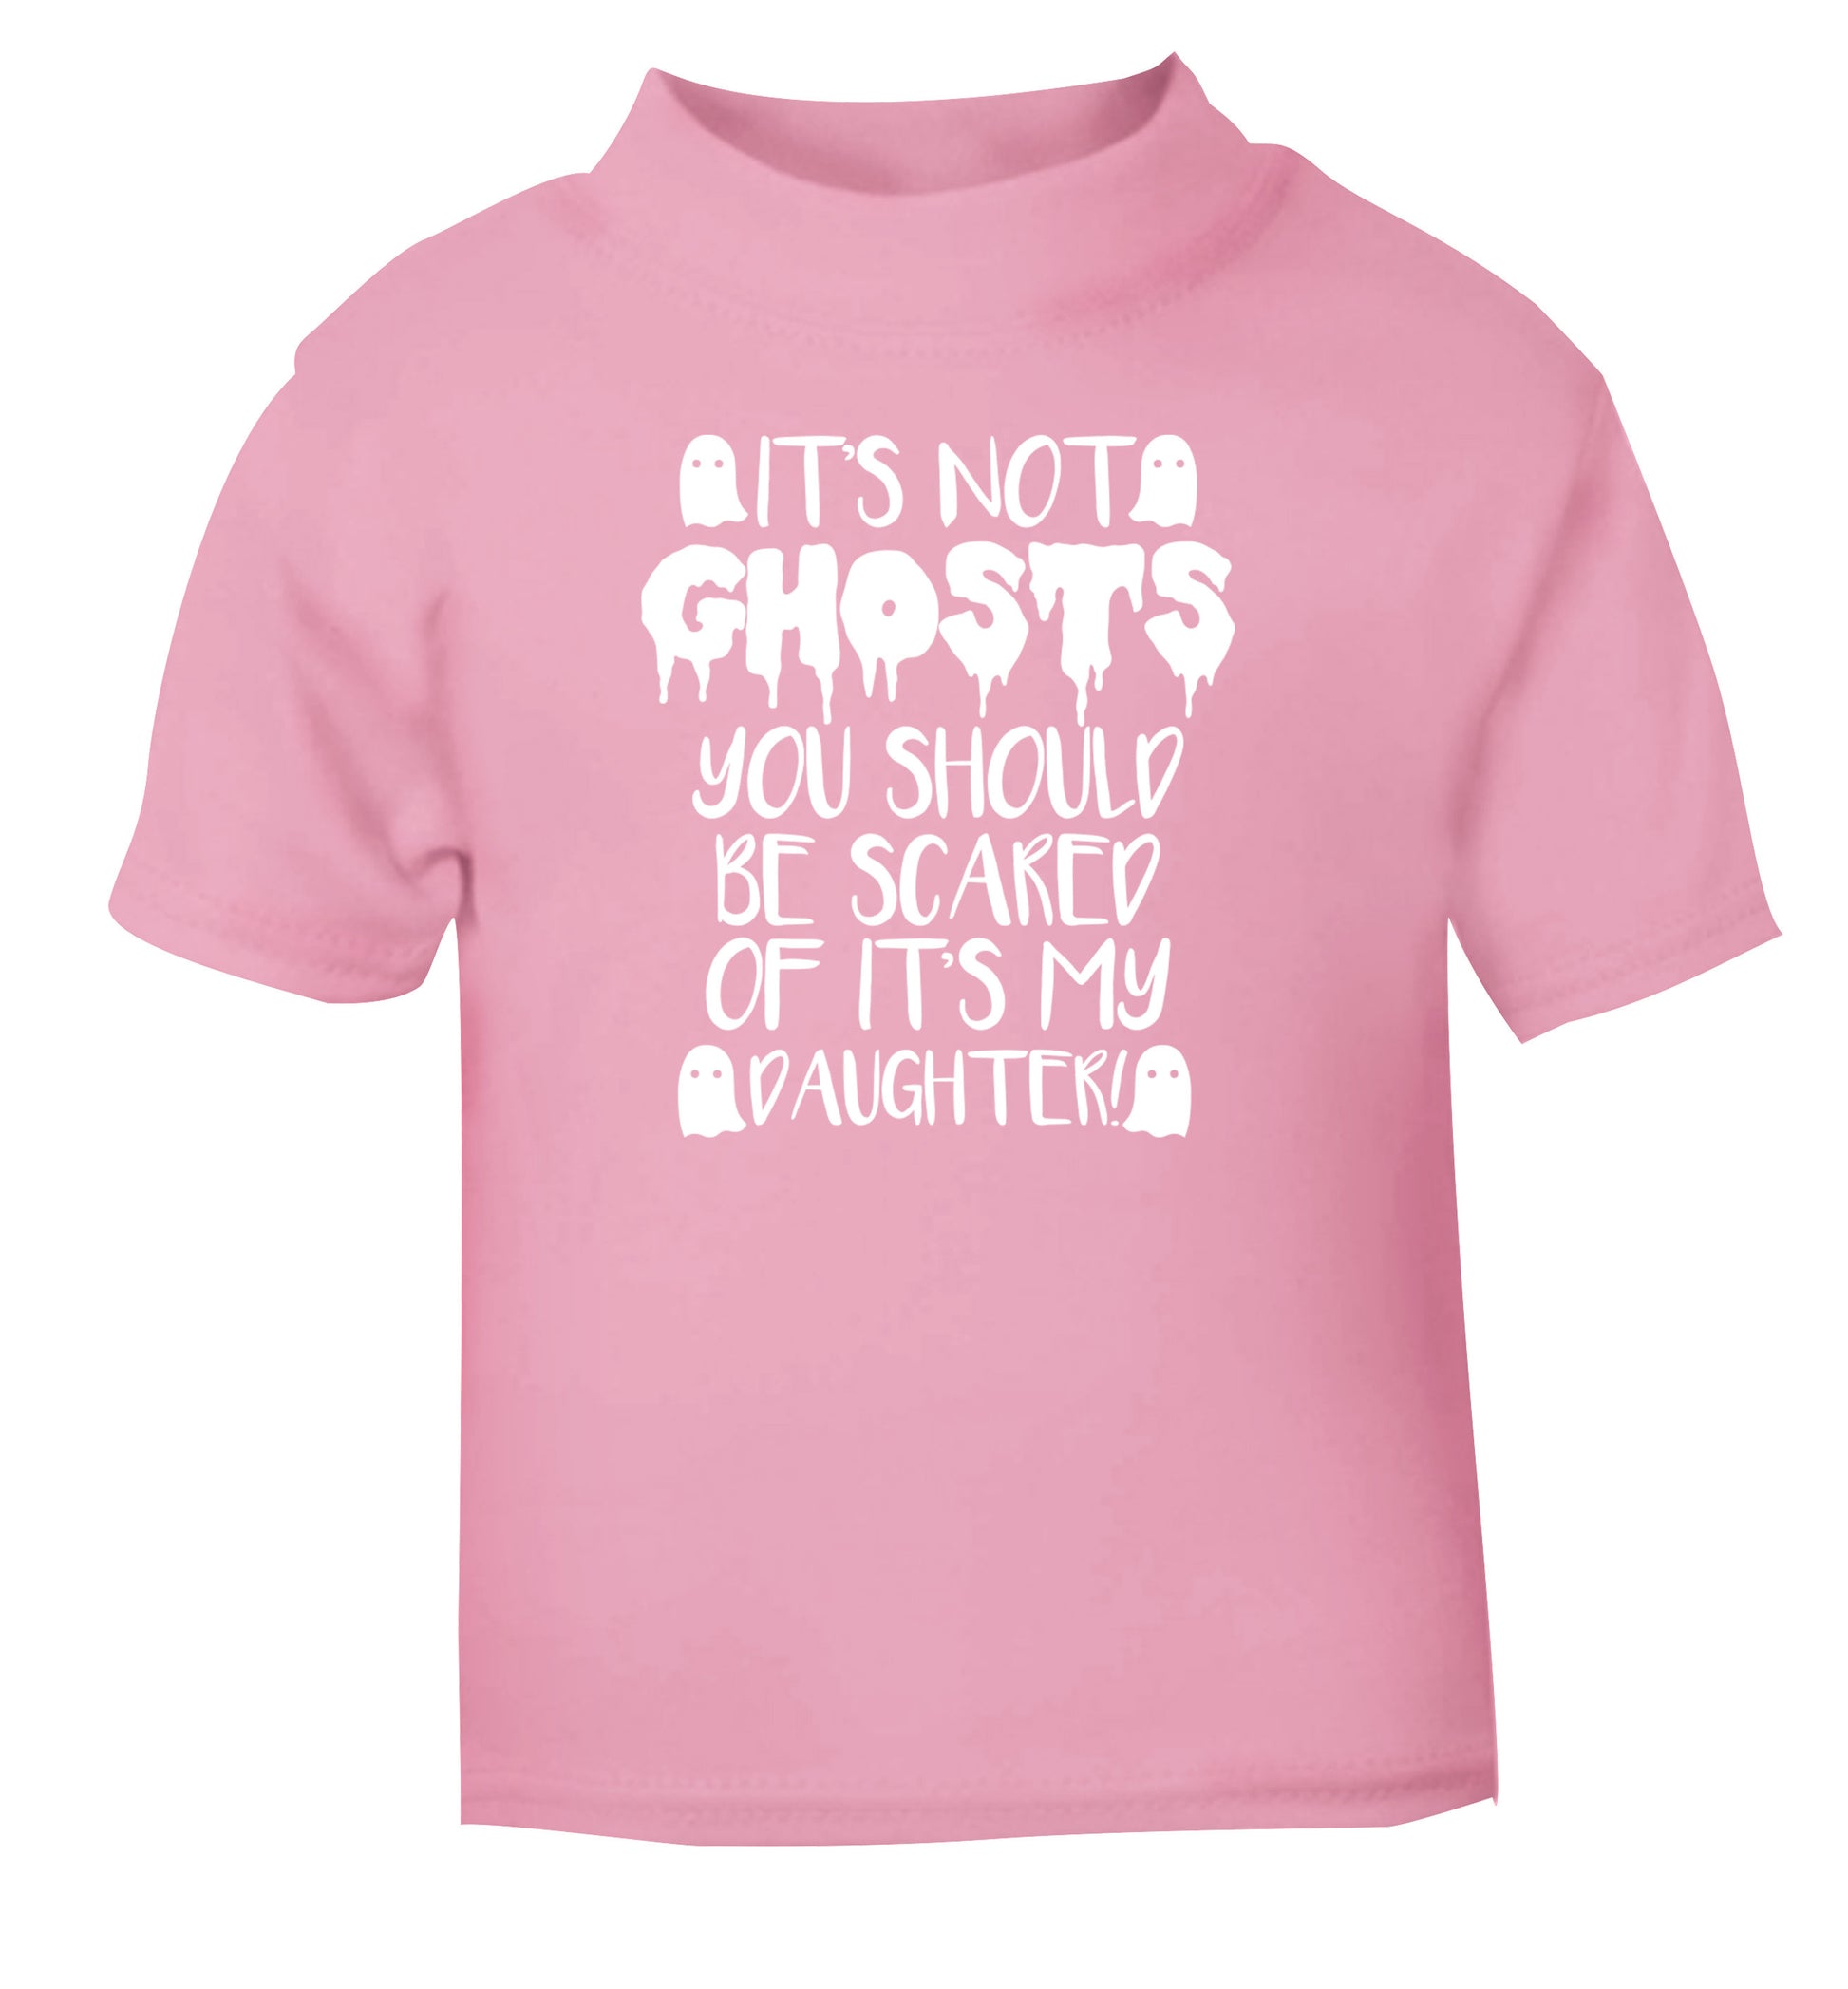 It's not ghosts you should be scared of it's my daughter! light pink Baby Toddler Tshirt 2 Years